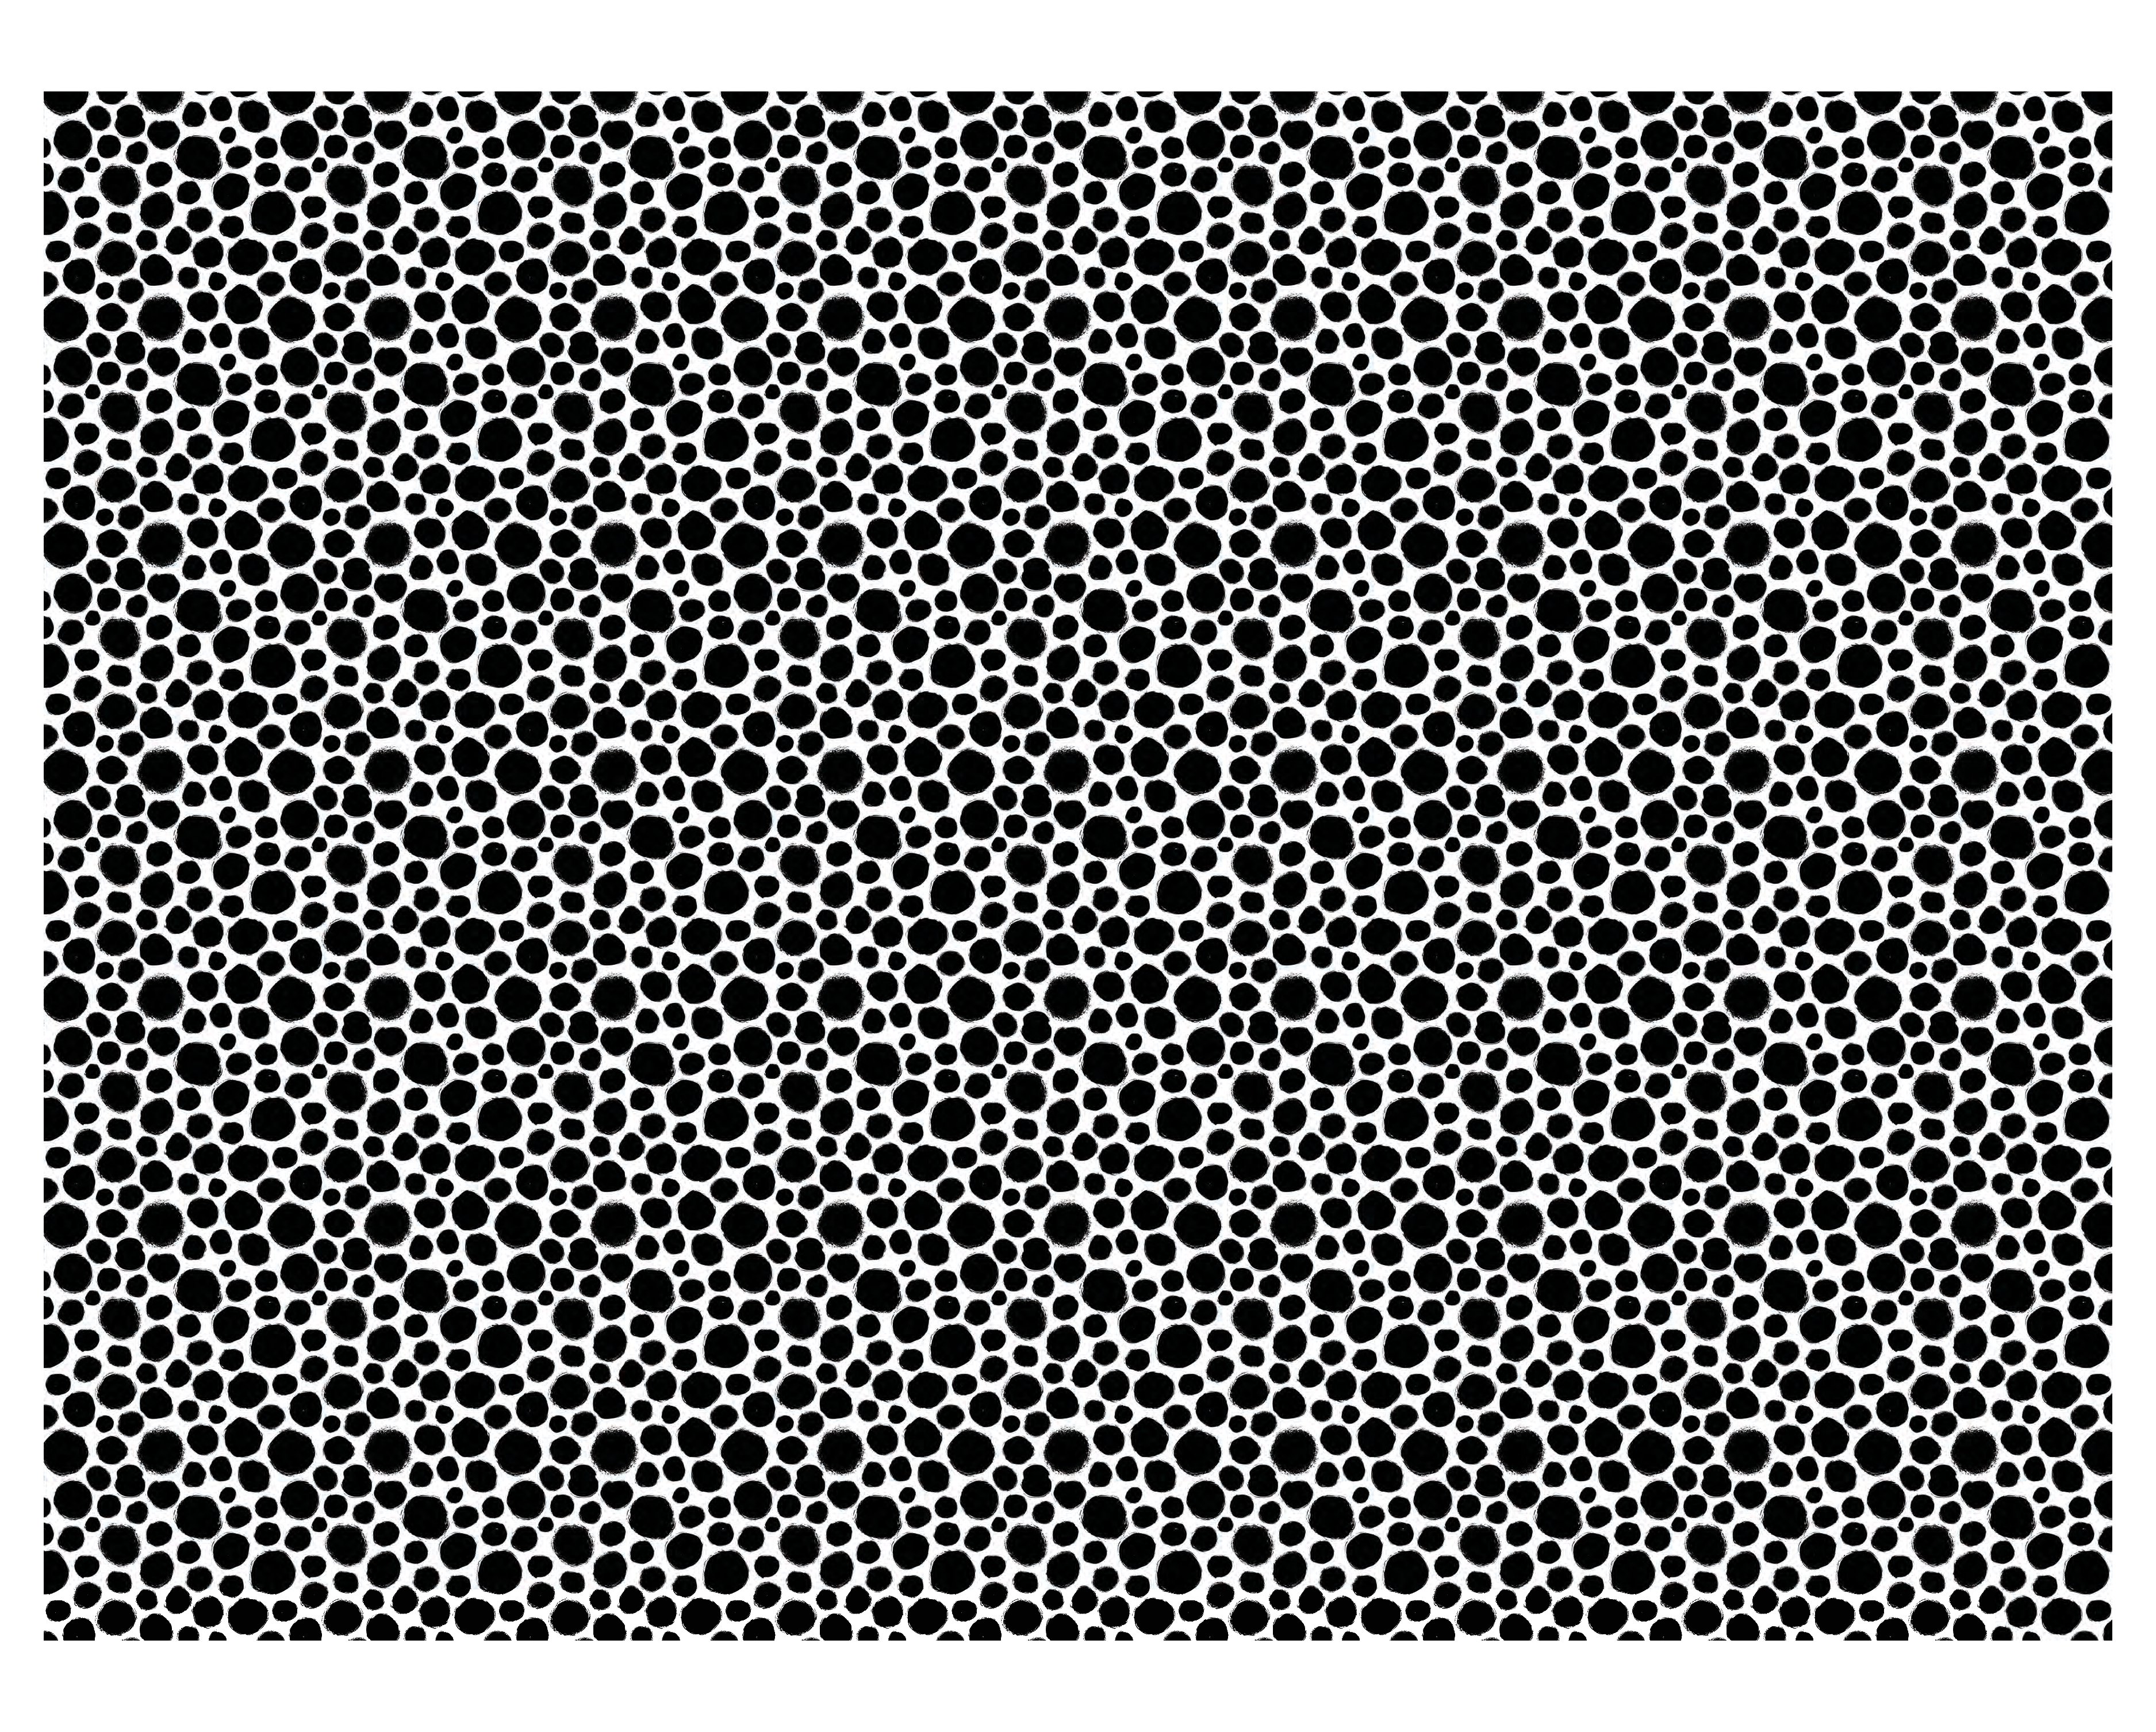 Black & White Gift Wrapping Papers - 6 sheets